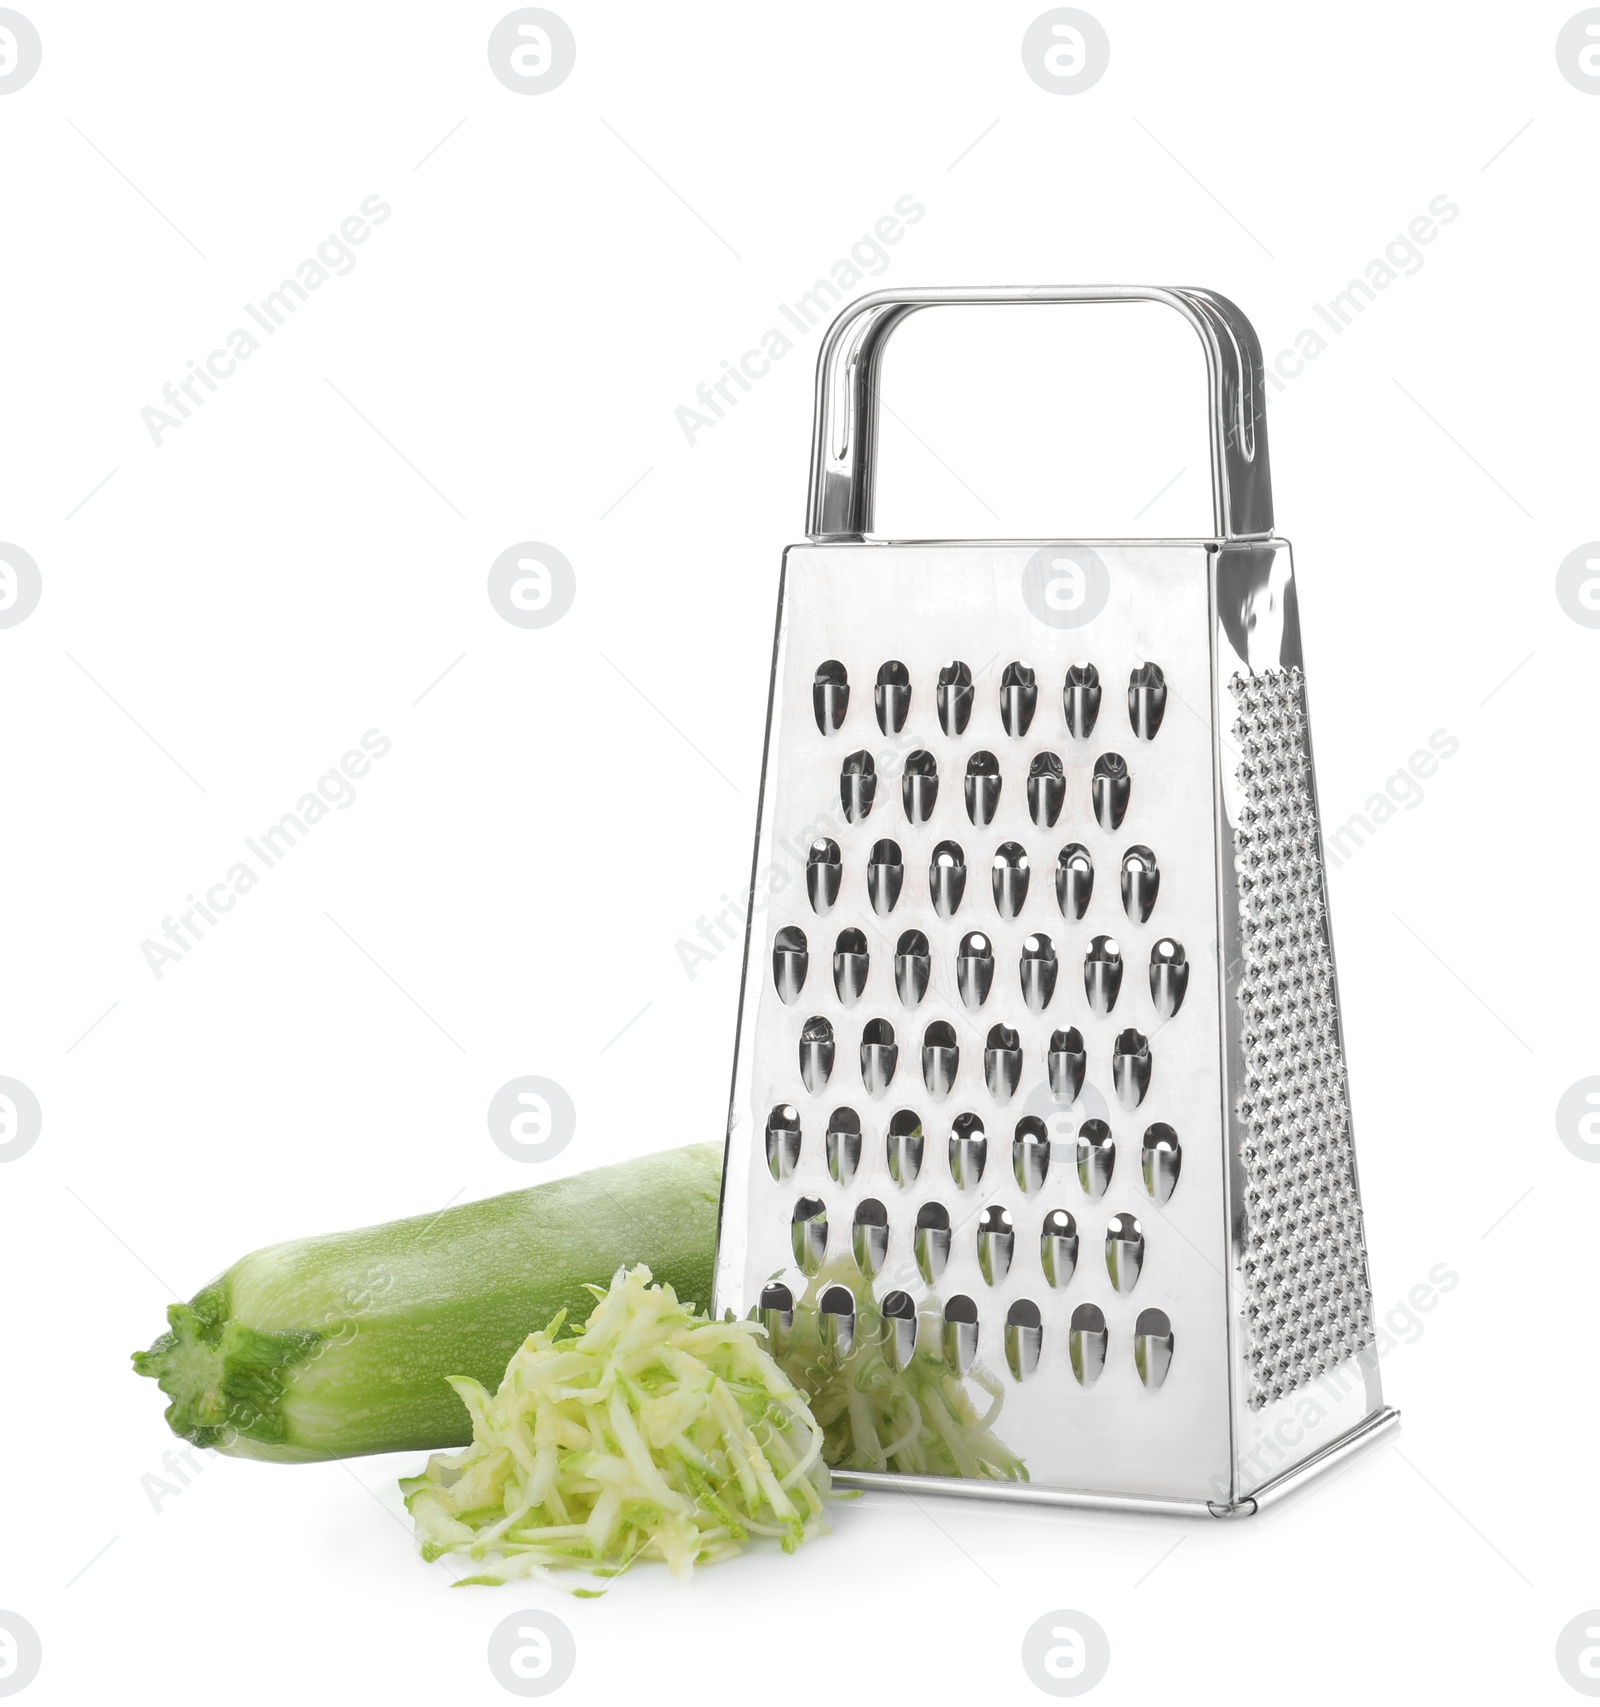 Photo of Stainless steel grater and fresh squash on white background